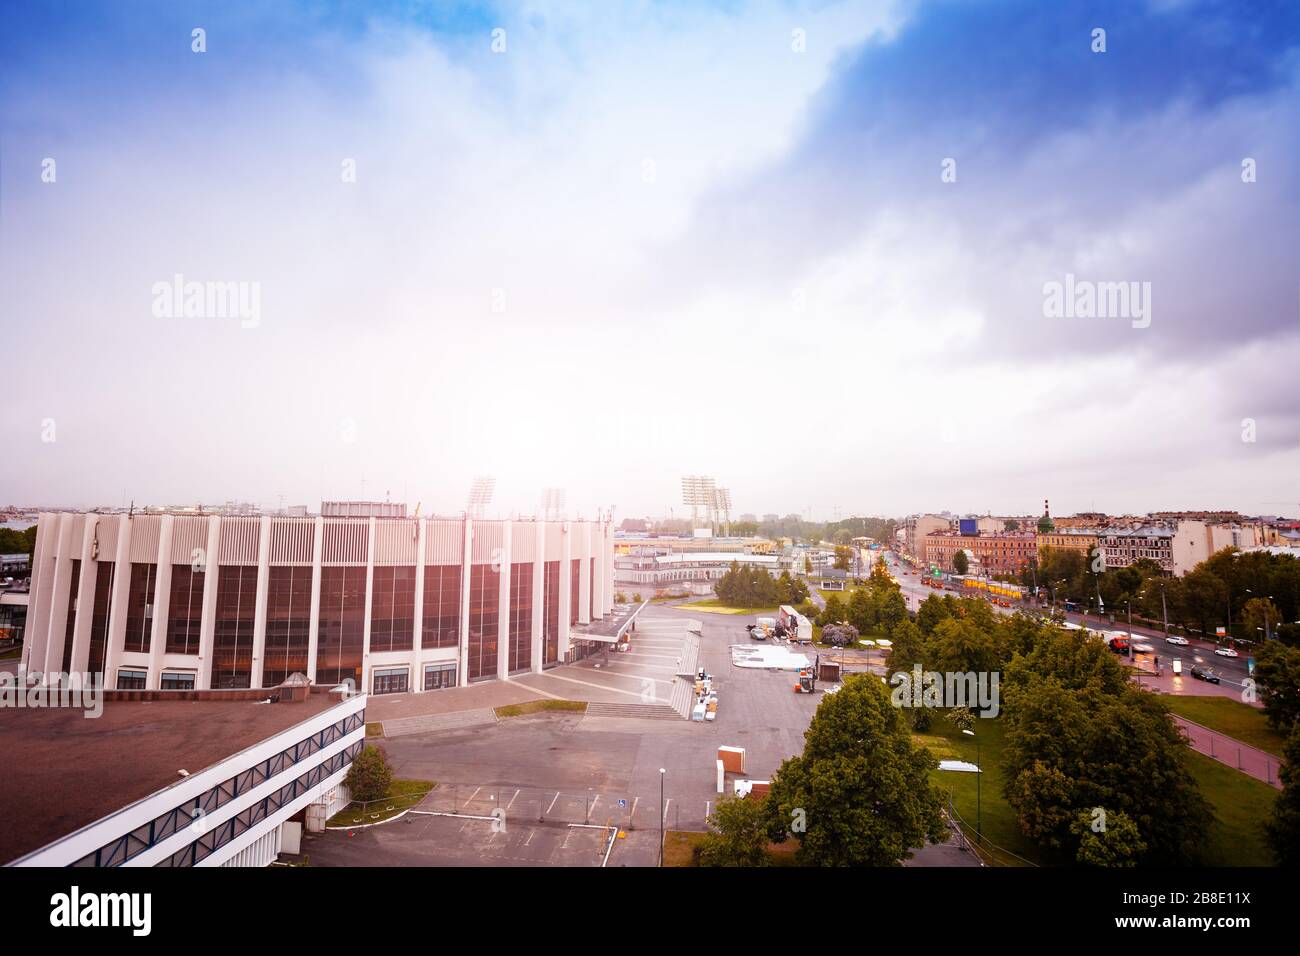 Yubileyny Sports Palace view from above and on Prospekt Dobrolyubova in Saint Petersburg Russia Stock Photo